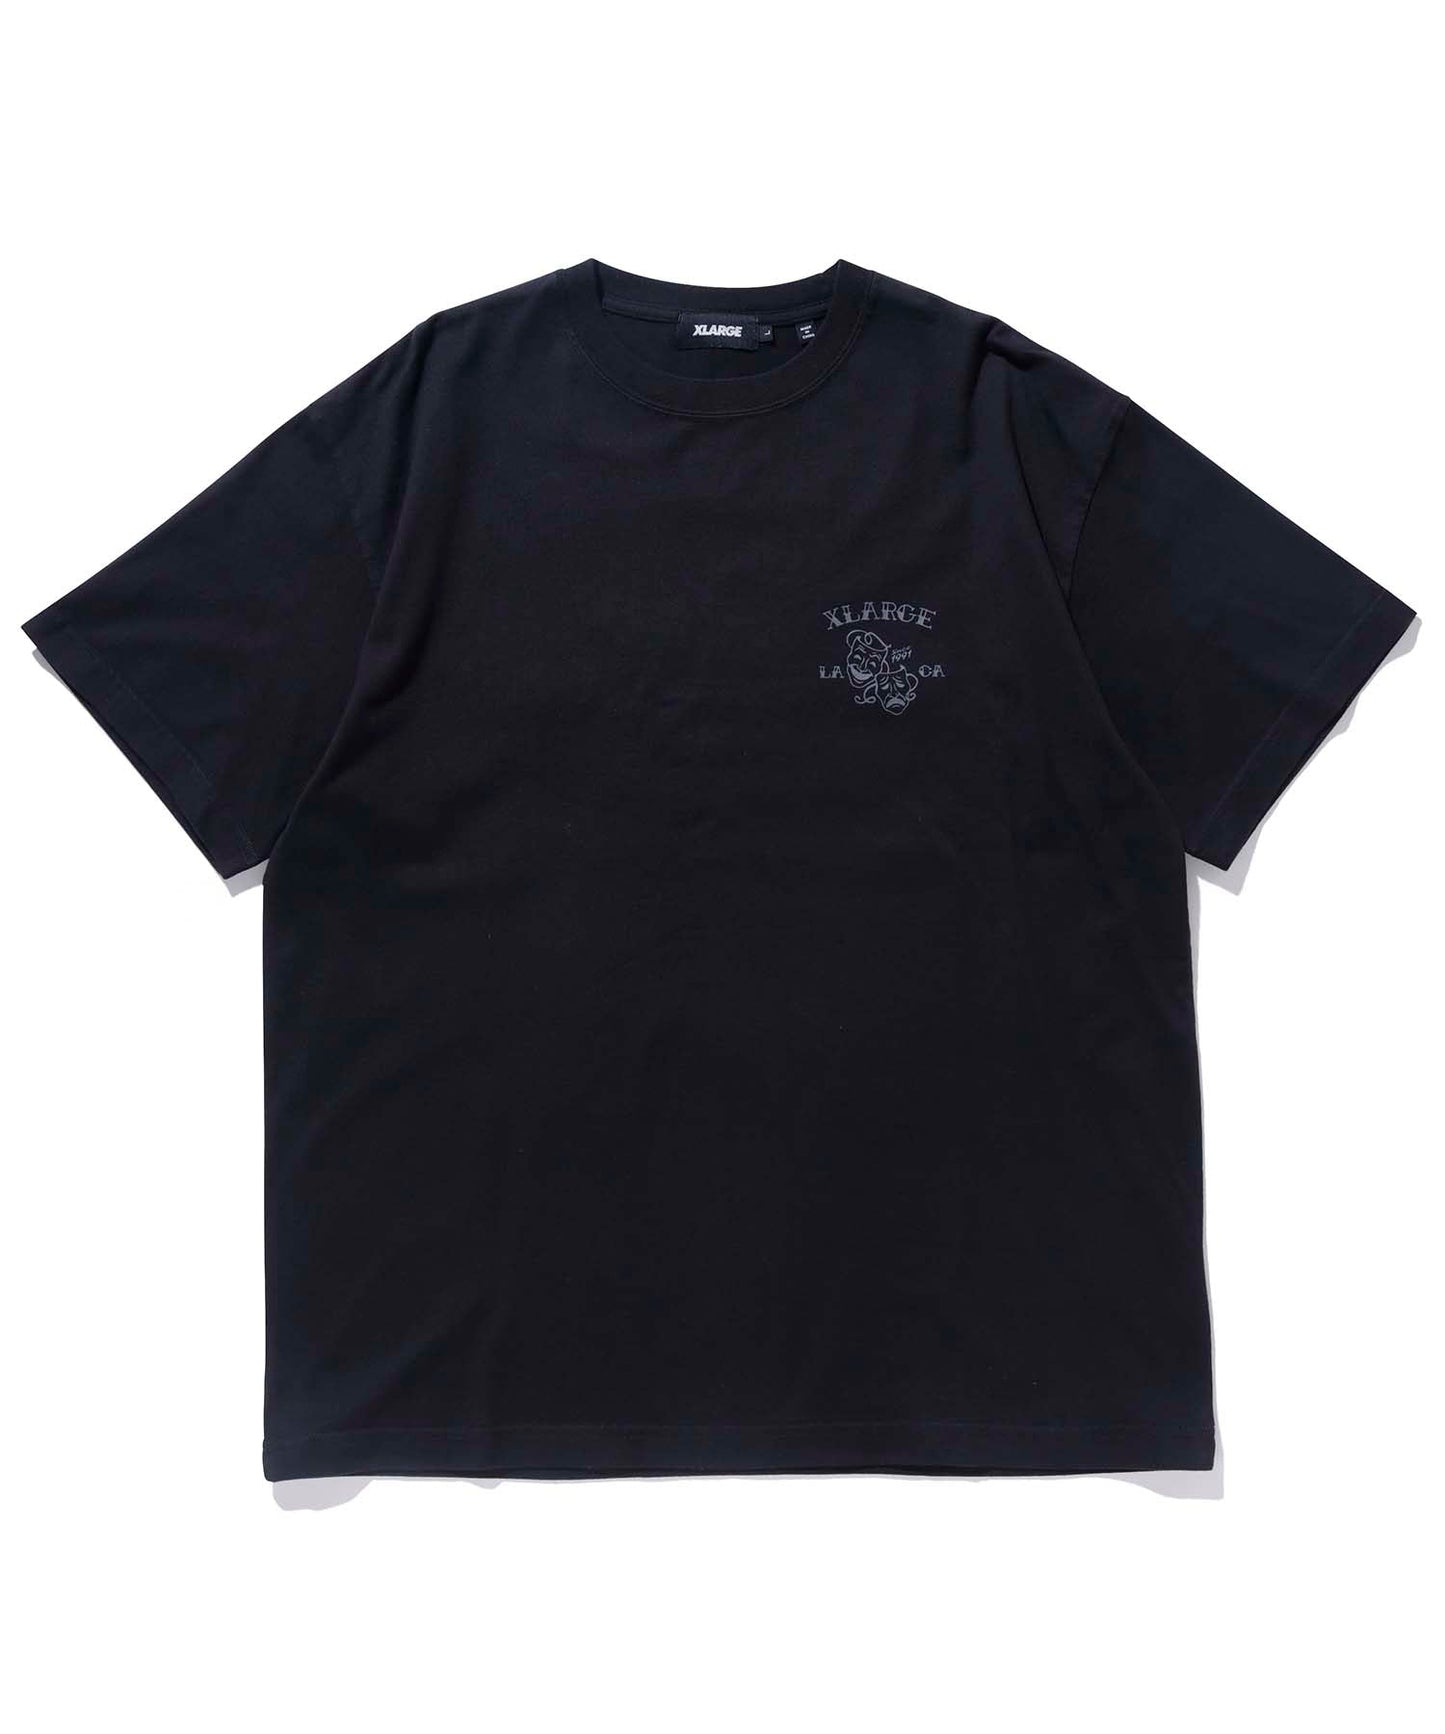 TWO FACE S/S TEE